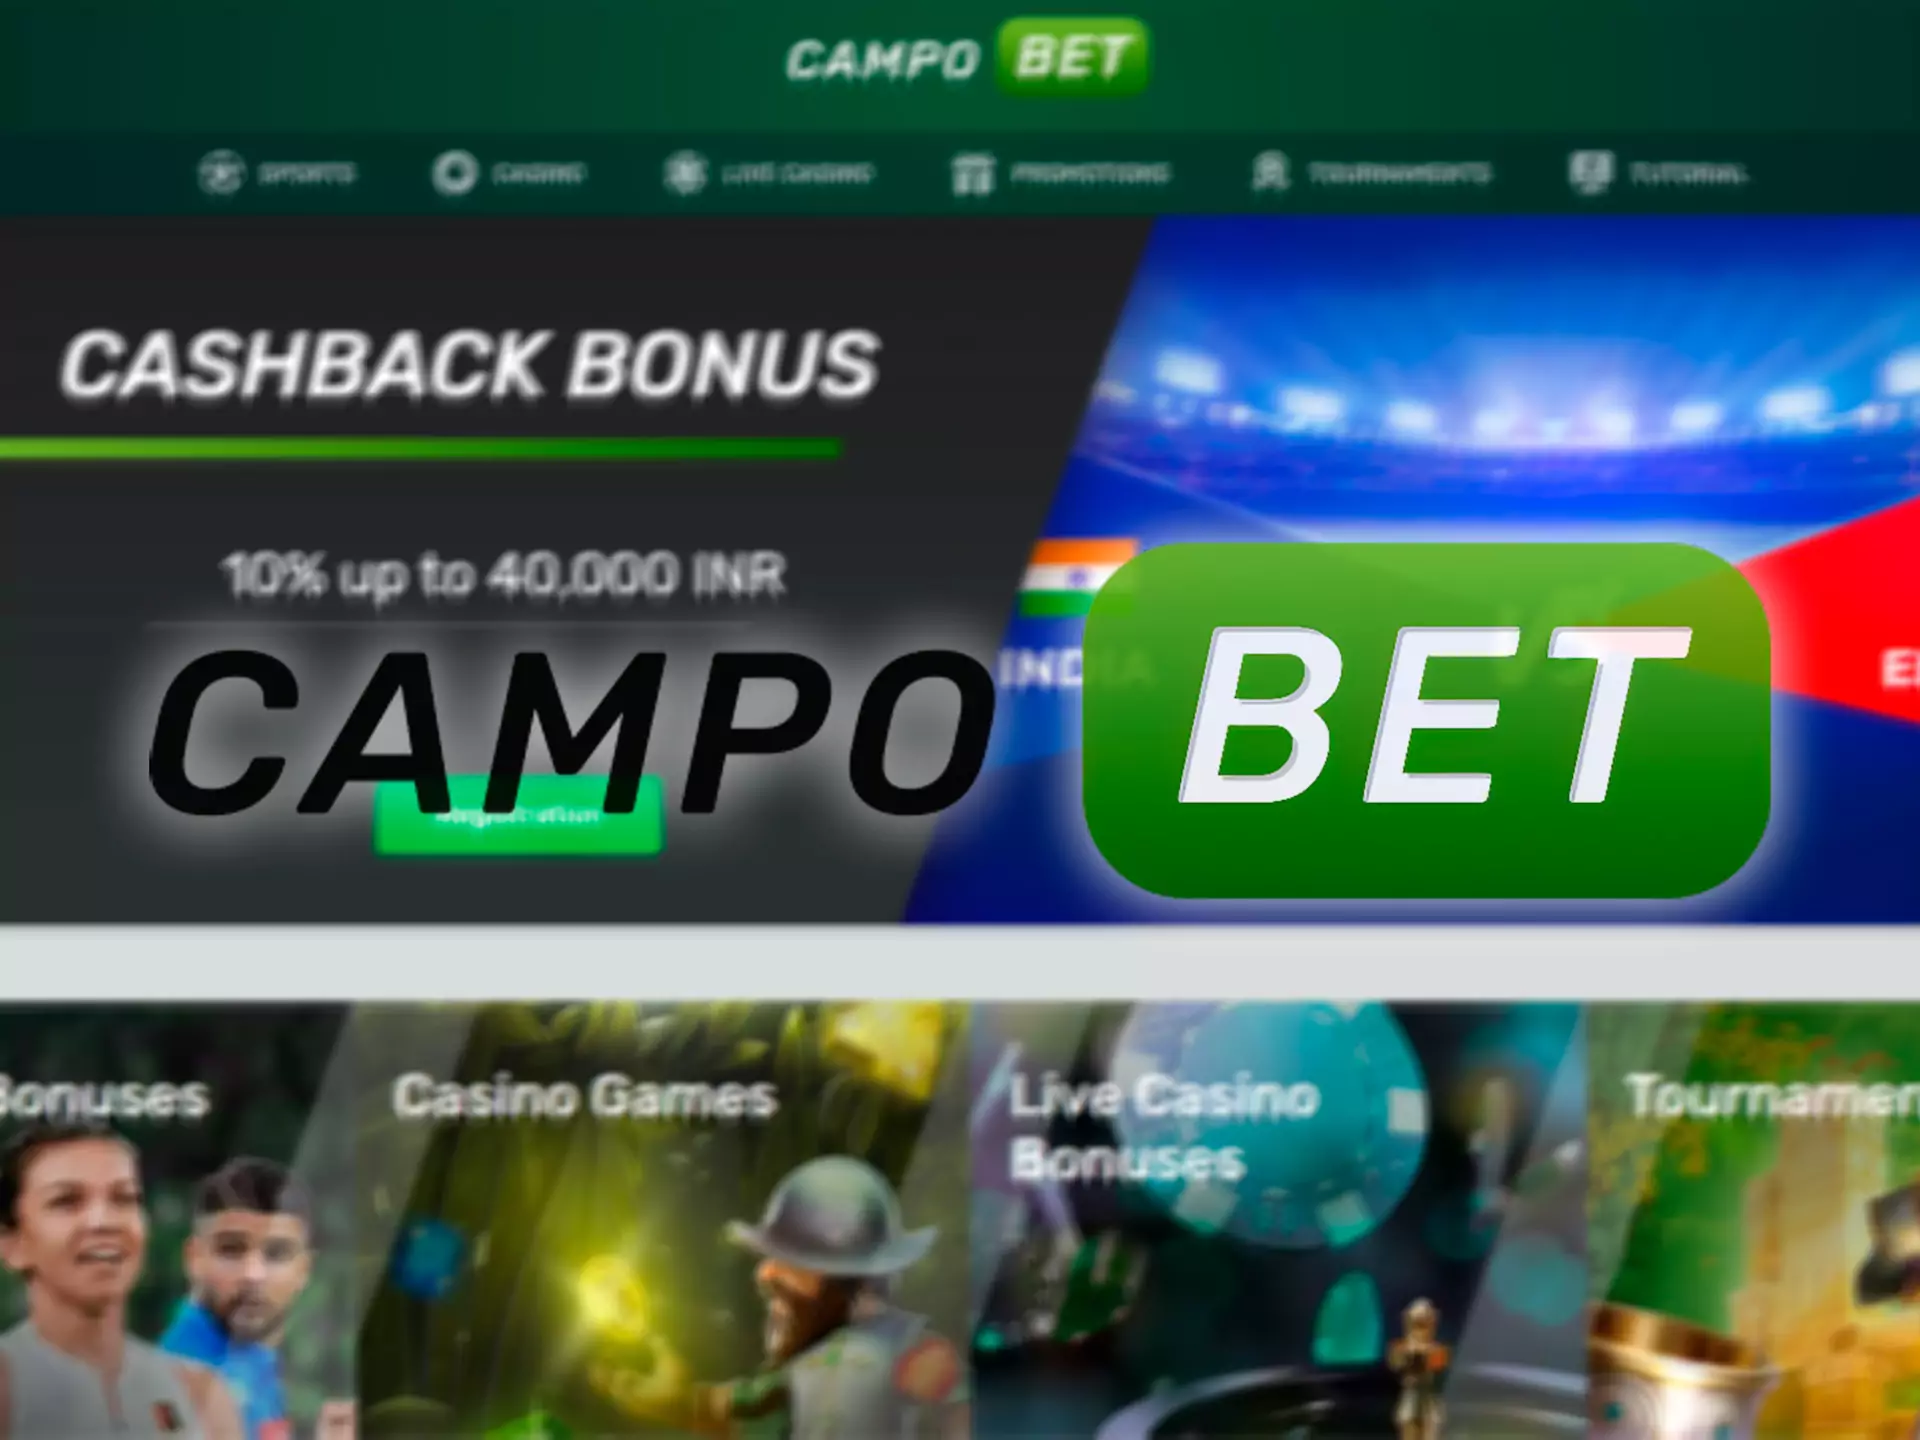 Campobet offers a large welcome bonus for newcomers to palce bets on IPL mathces.